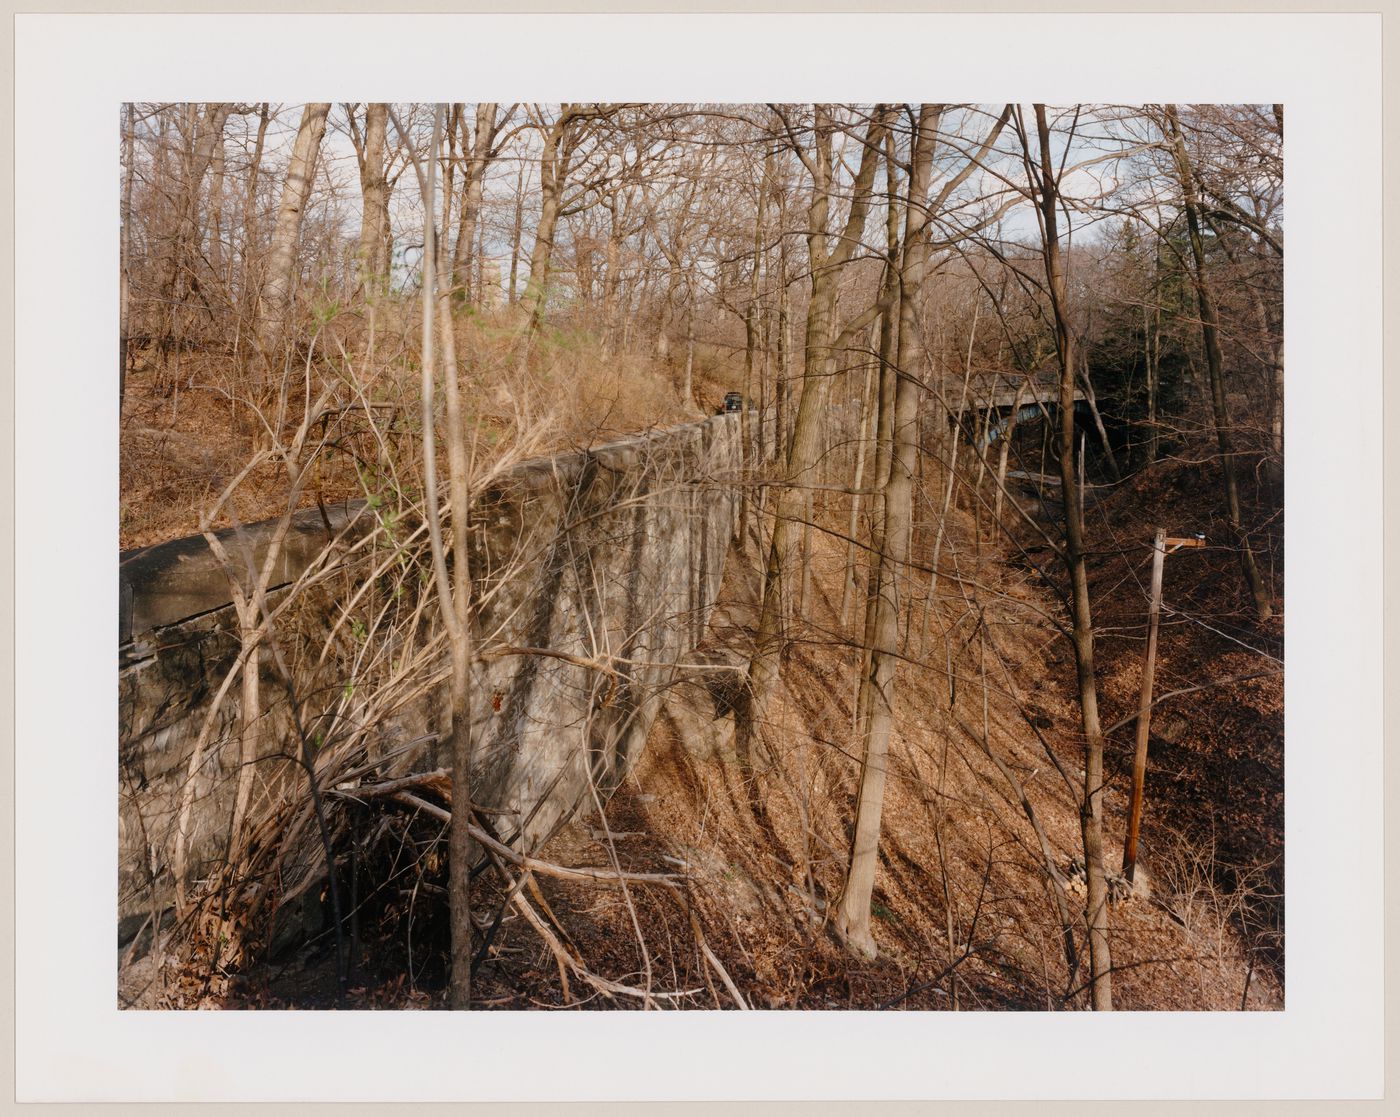 Viewing Olmsted: View along the approach road with the iron bridge, "Walden", the Cyrus H. McCormick Jr. Estate, Woodleigh Road, Lake Forest, Illinois